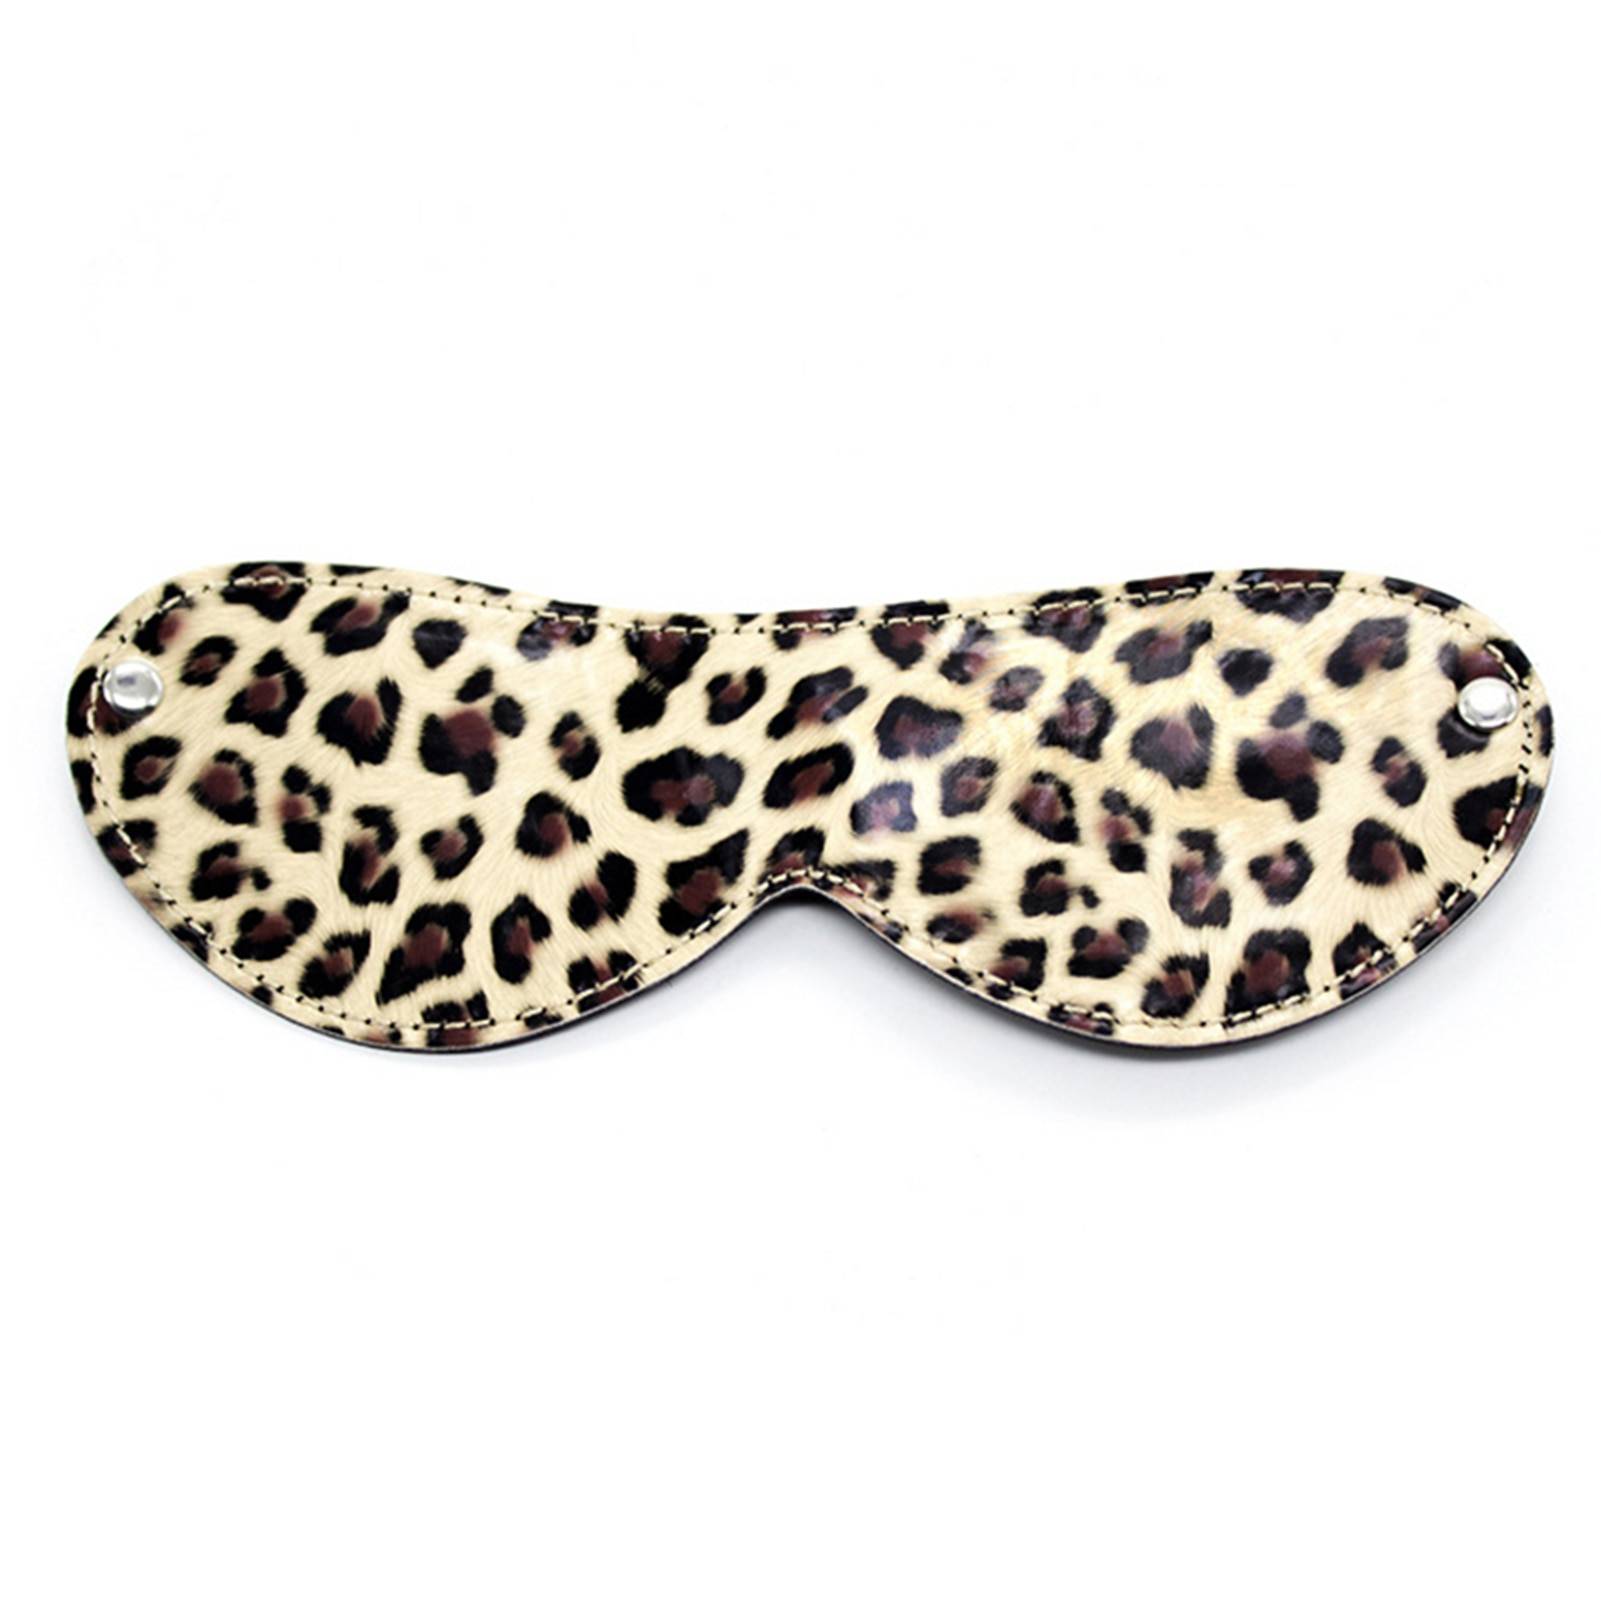 Leopard Print Leather Sex Toys & Accessories Set for Woman